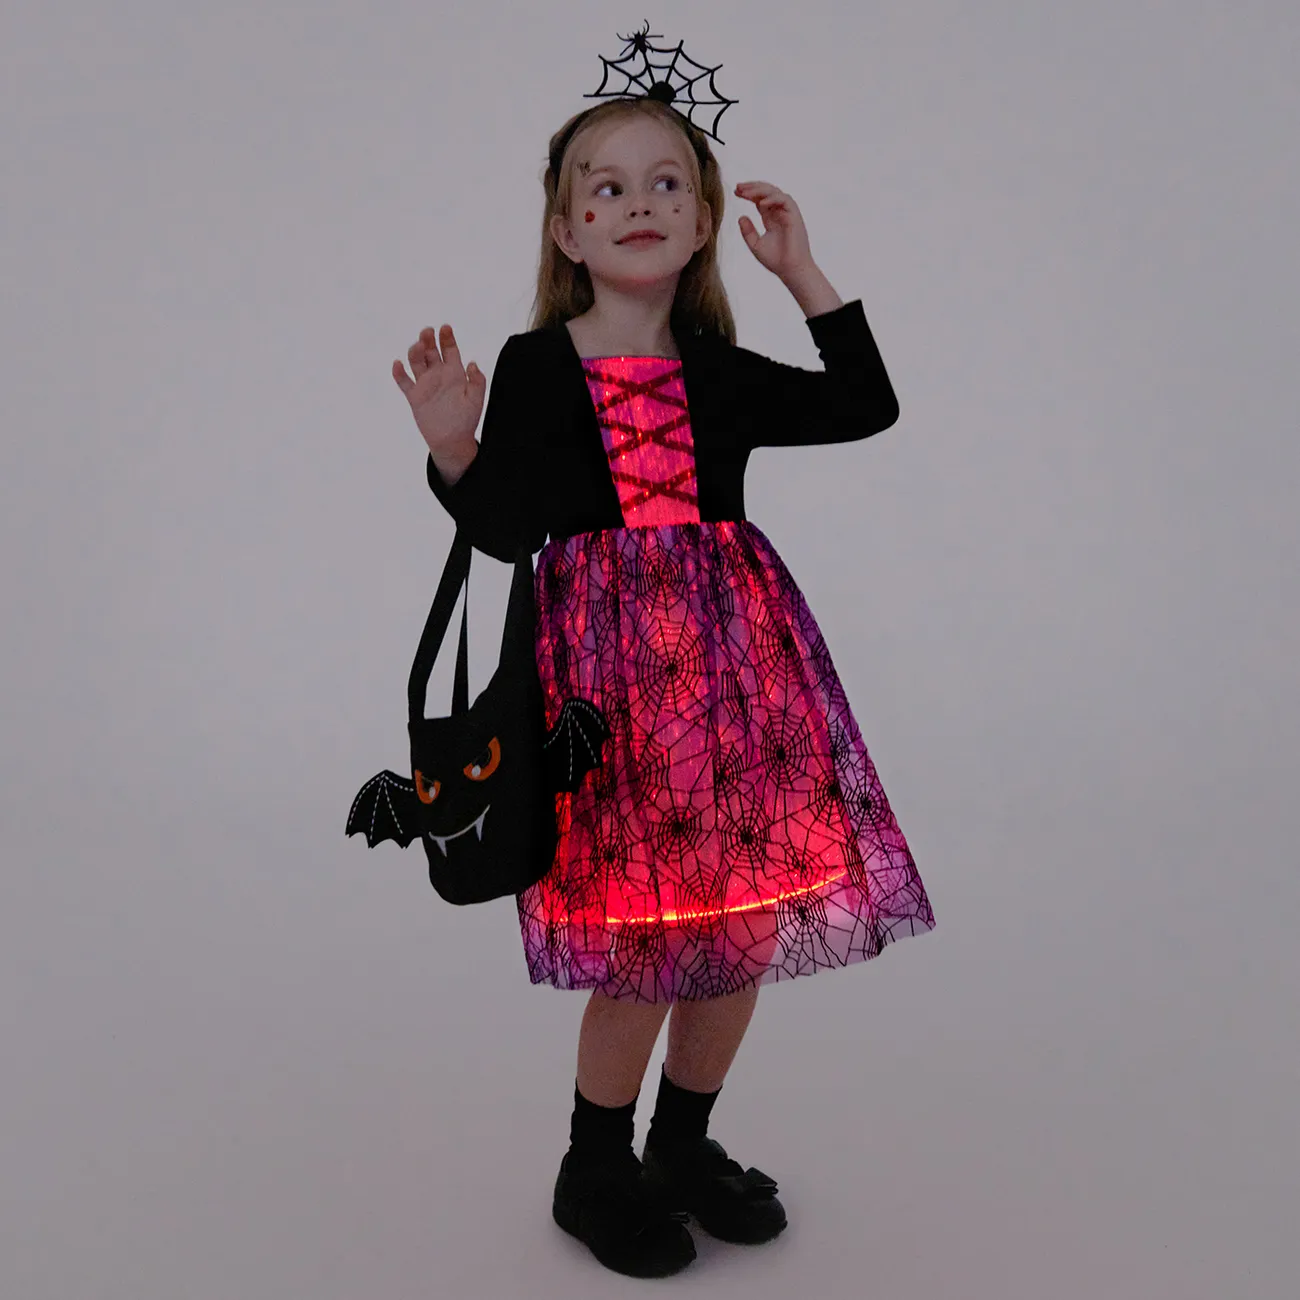 Go-Glow Illuminating Dark Dress with Light Up 3D Print Skirt Including Controller (Built-In Battery) Purple big image 1